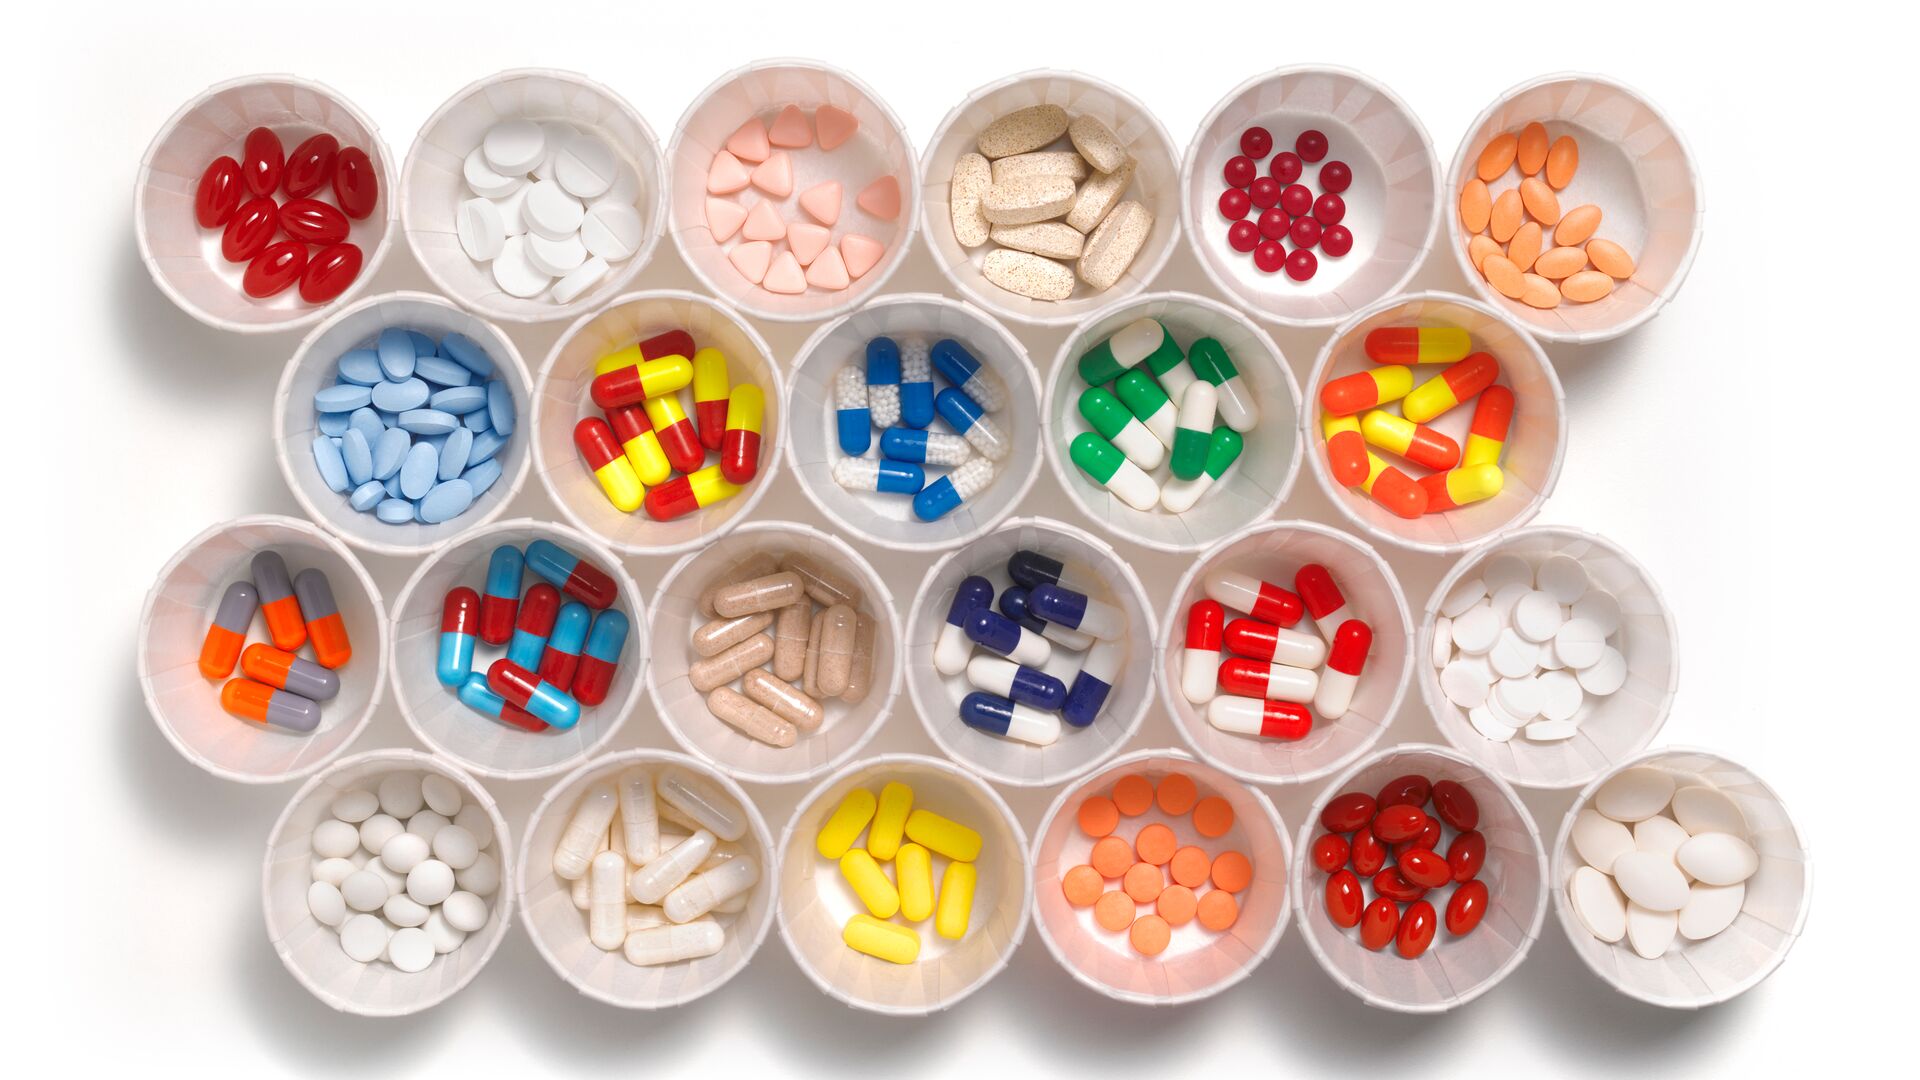 Dixie cups lined up in rows appear to contain a variety of prescription medication visible from a top down view against a white background.